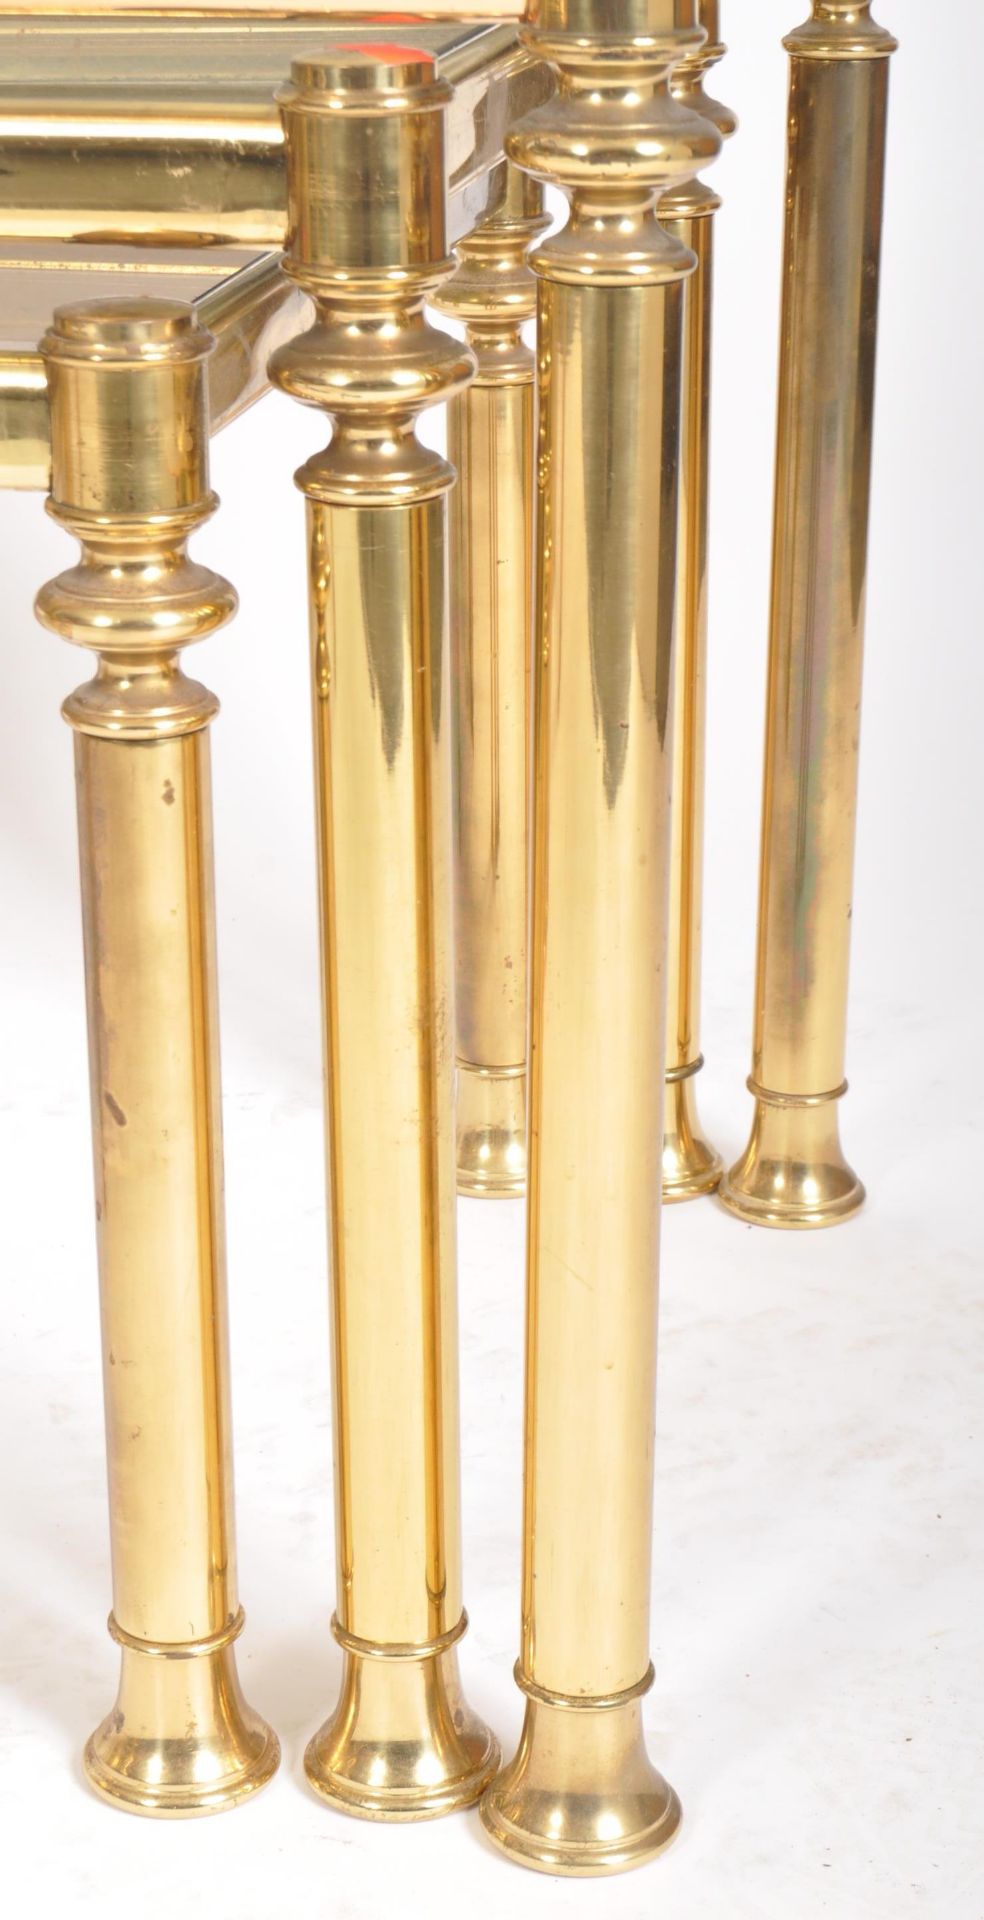 PAIR OF 1980s BRASS AND SMOKED GLASS NESTING TABLES - Image 2 of 4